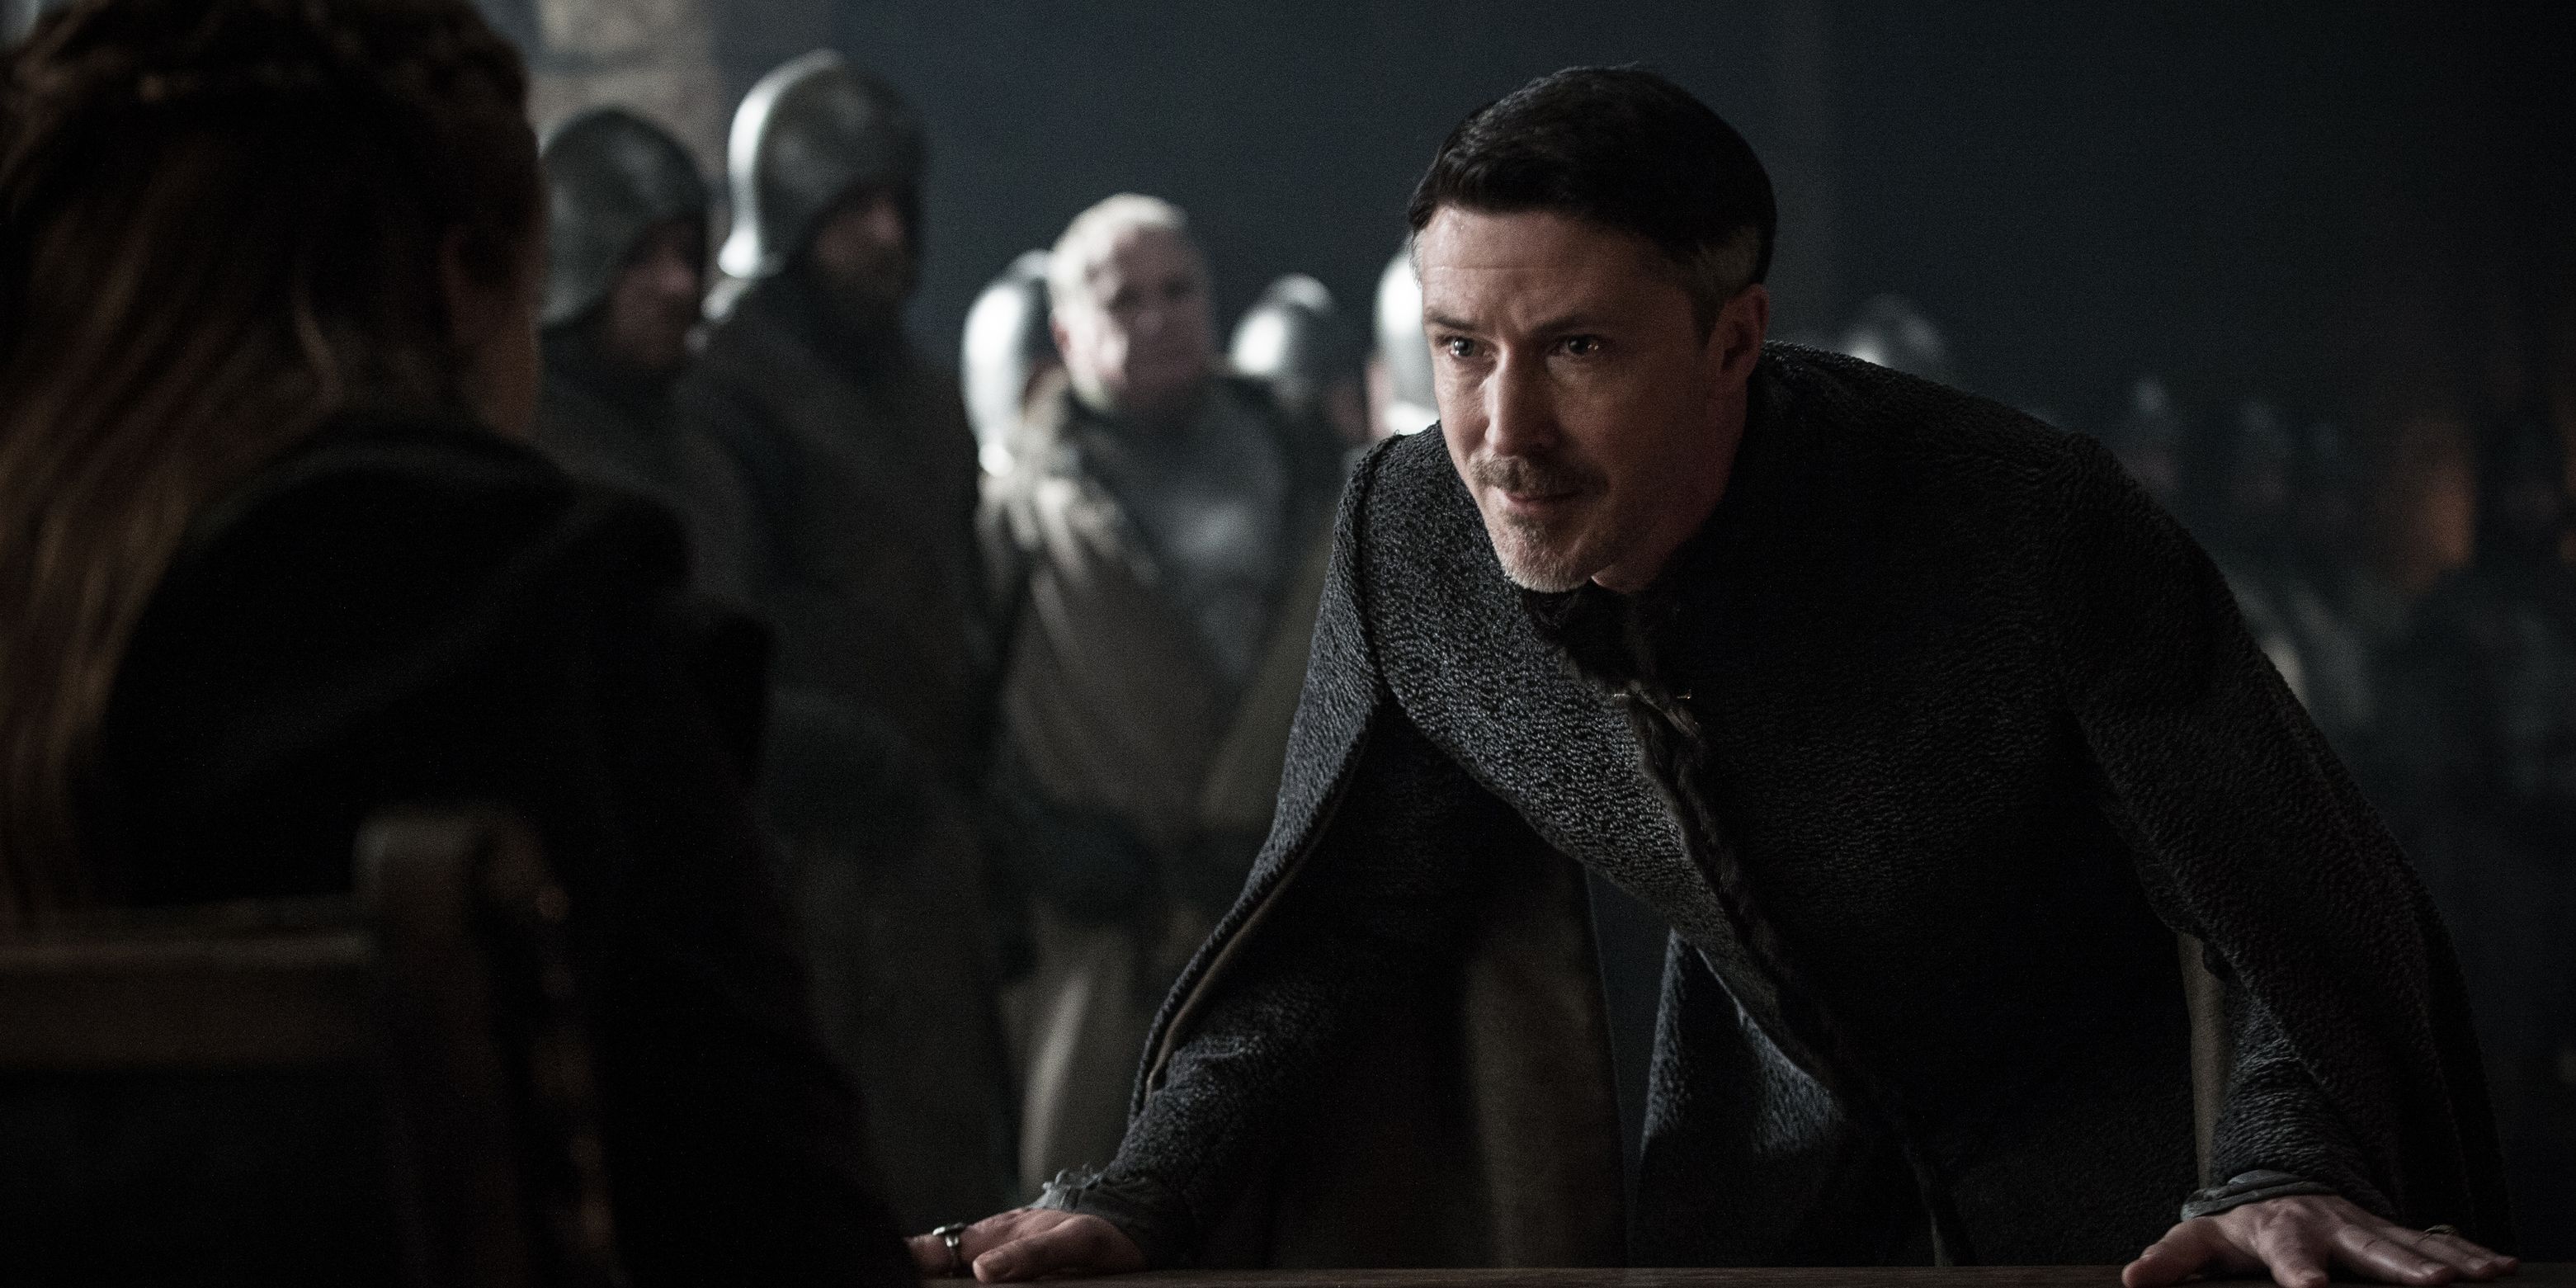 Petyr Baelish looking angry on trial in Game of Thrones 